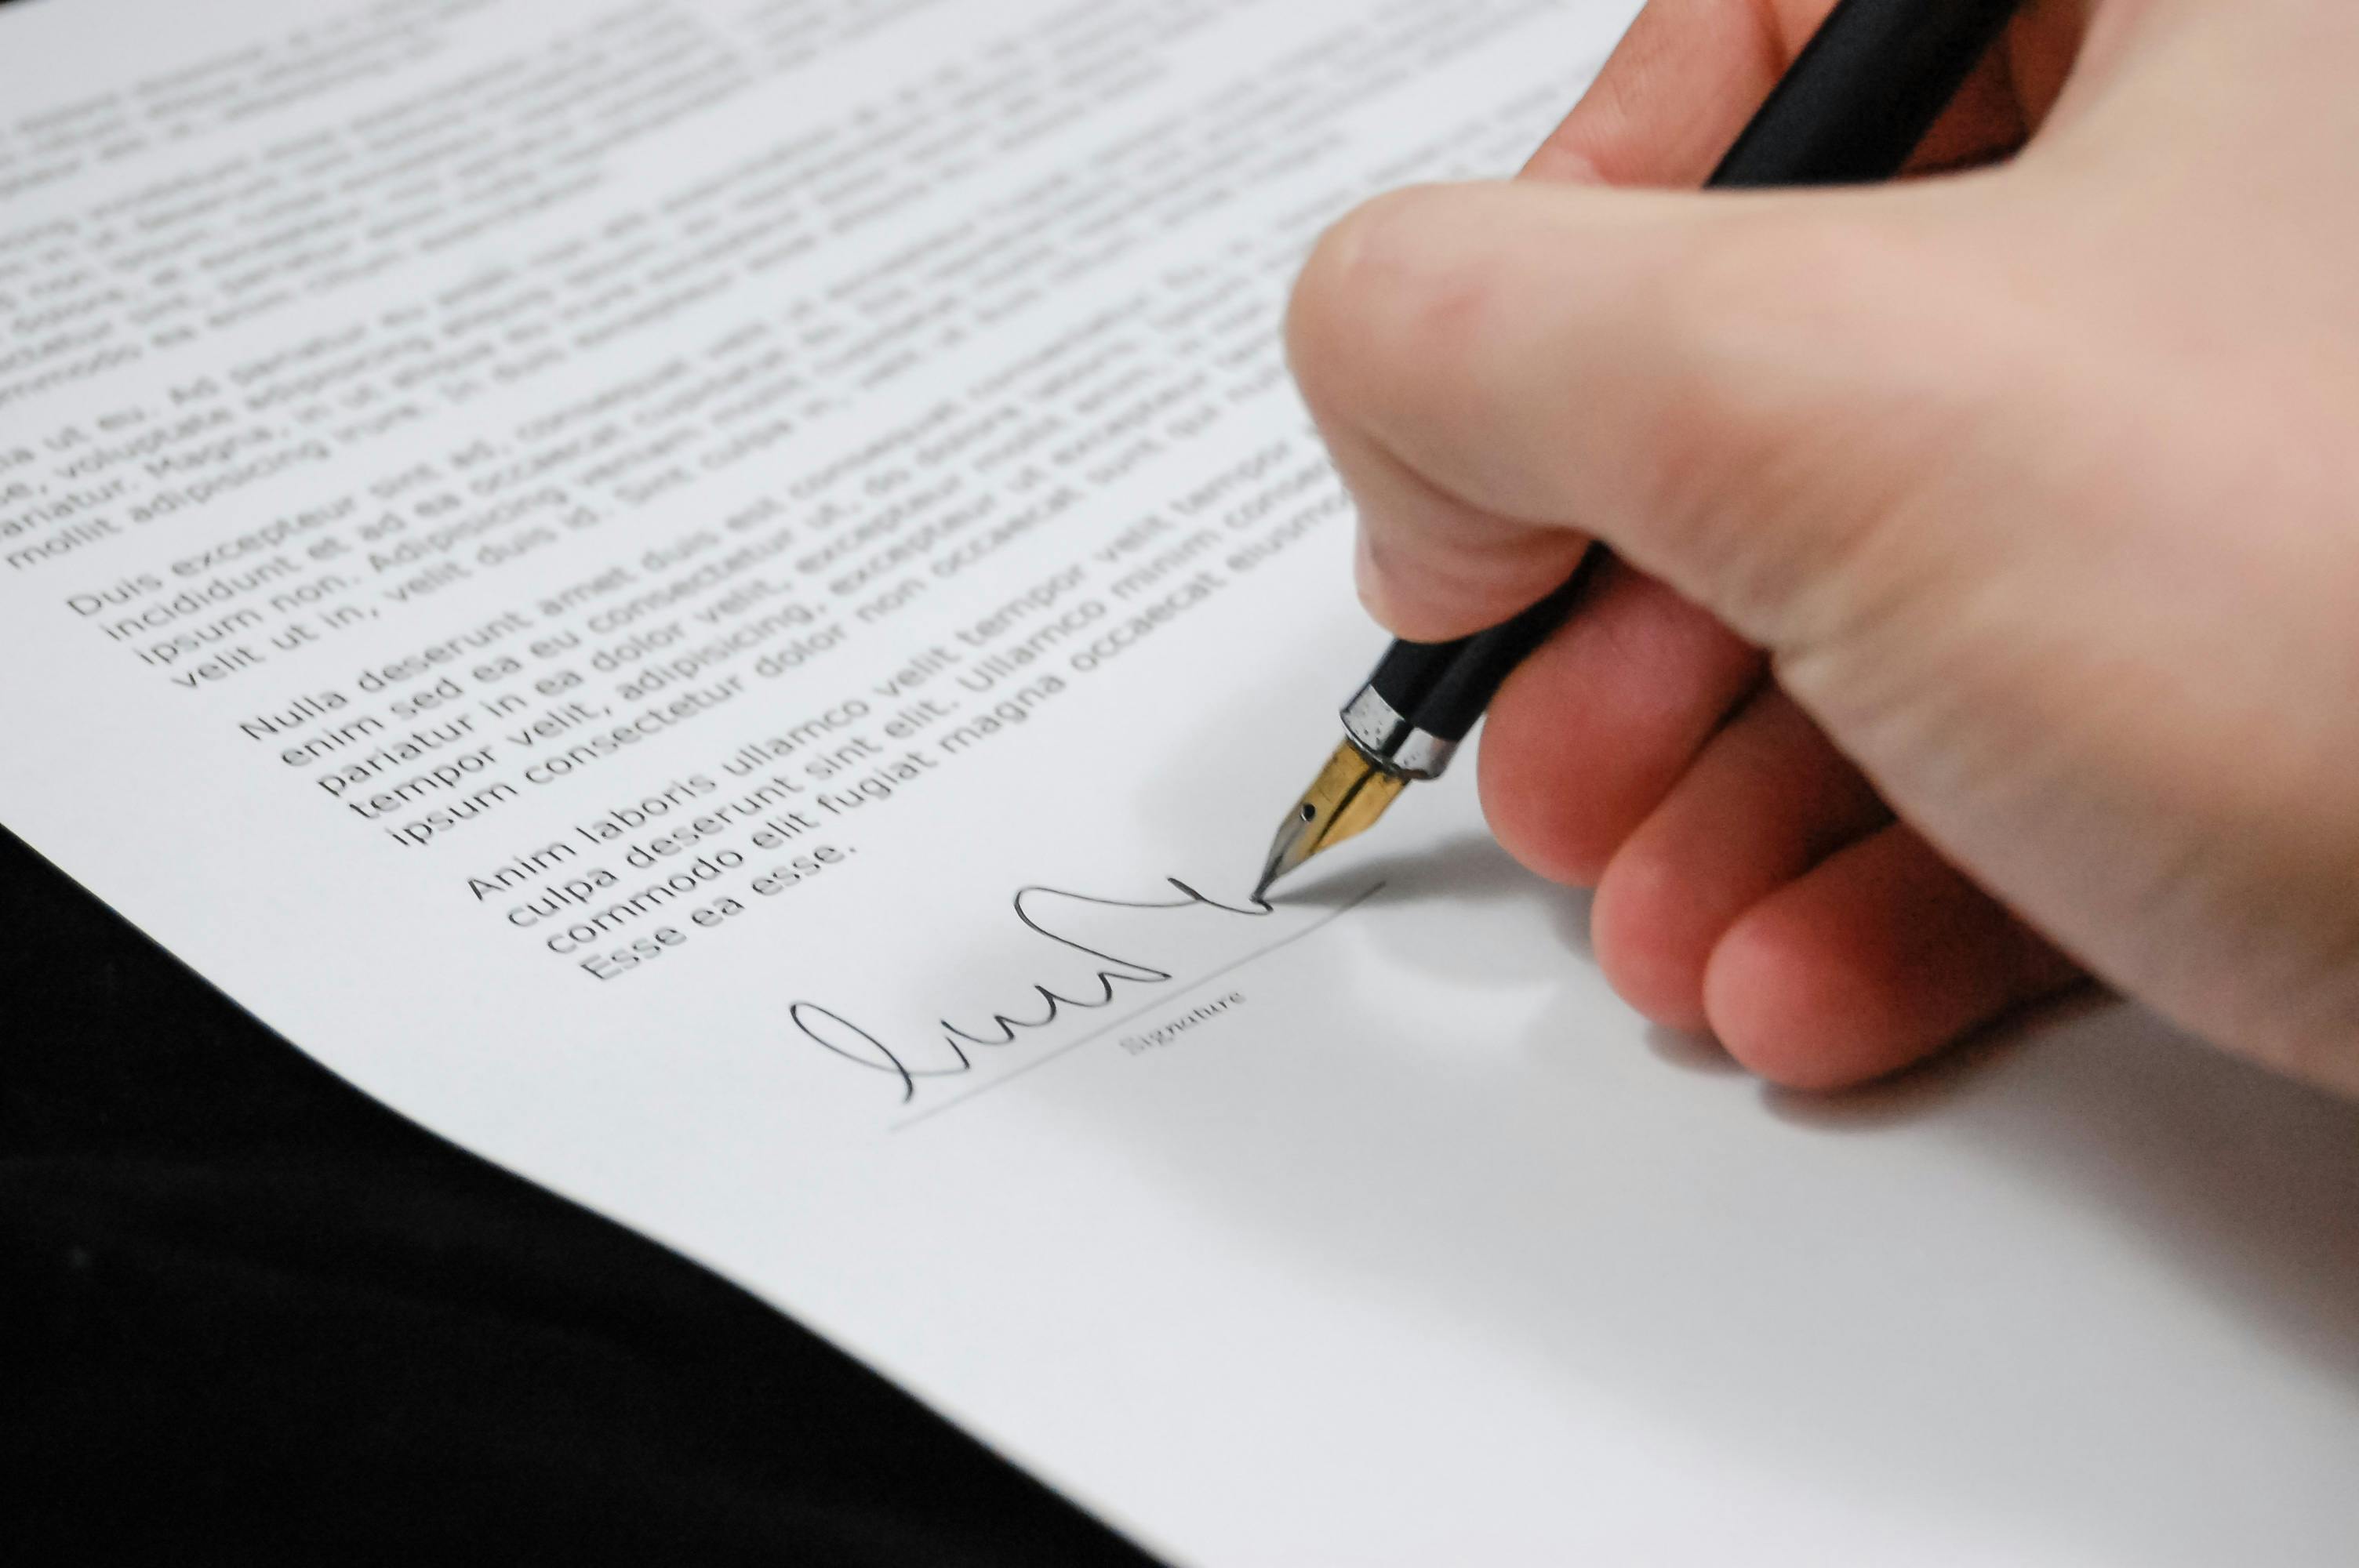 A man signing legal documents | Source: Pexels